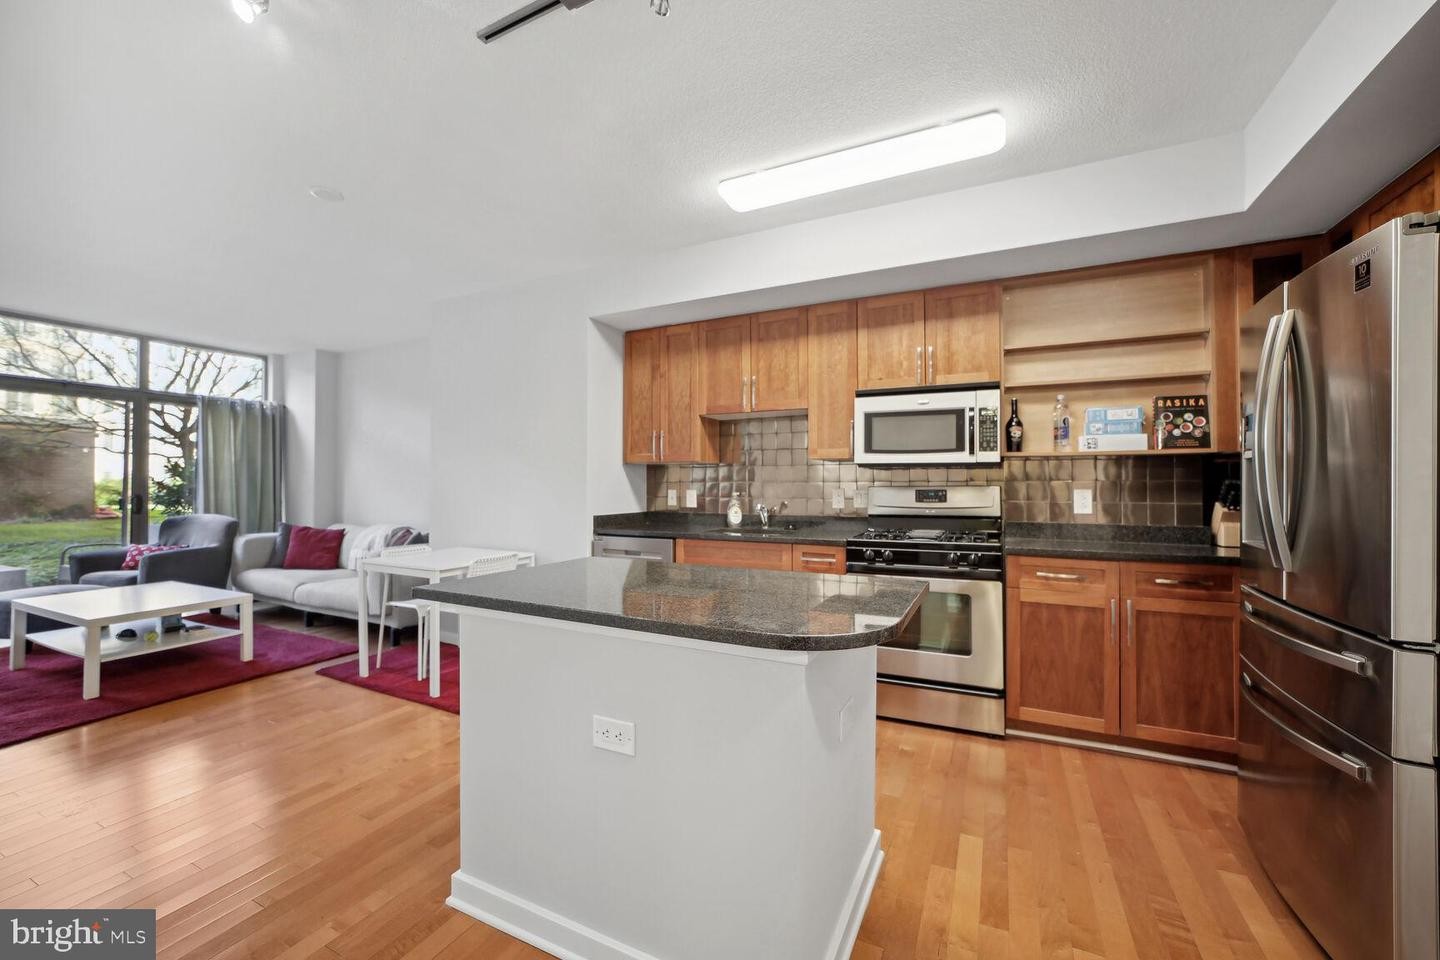 6. 475 K St NW 